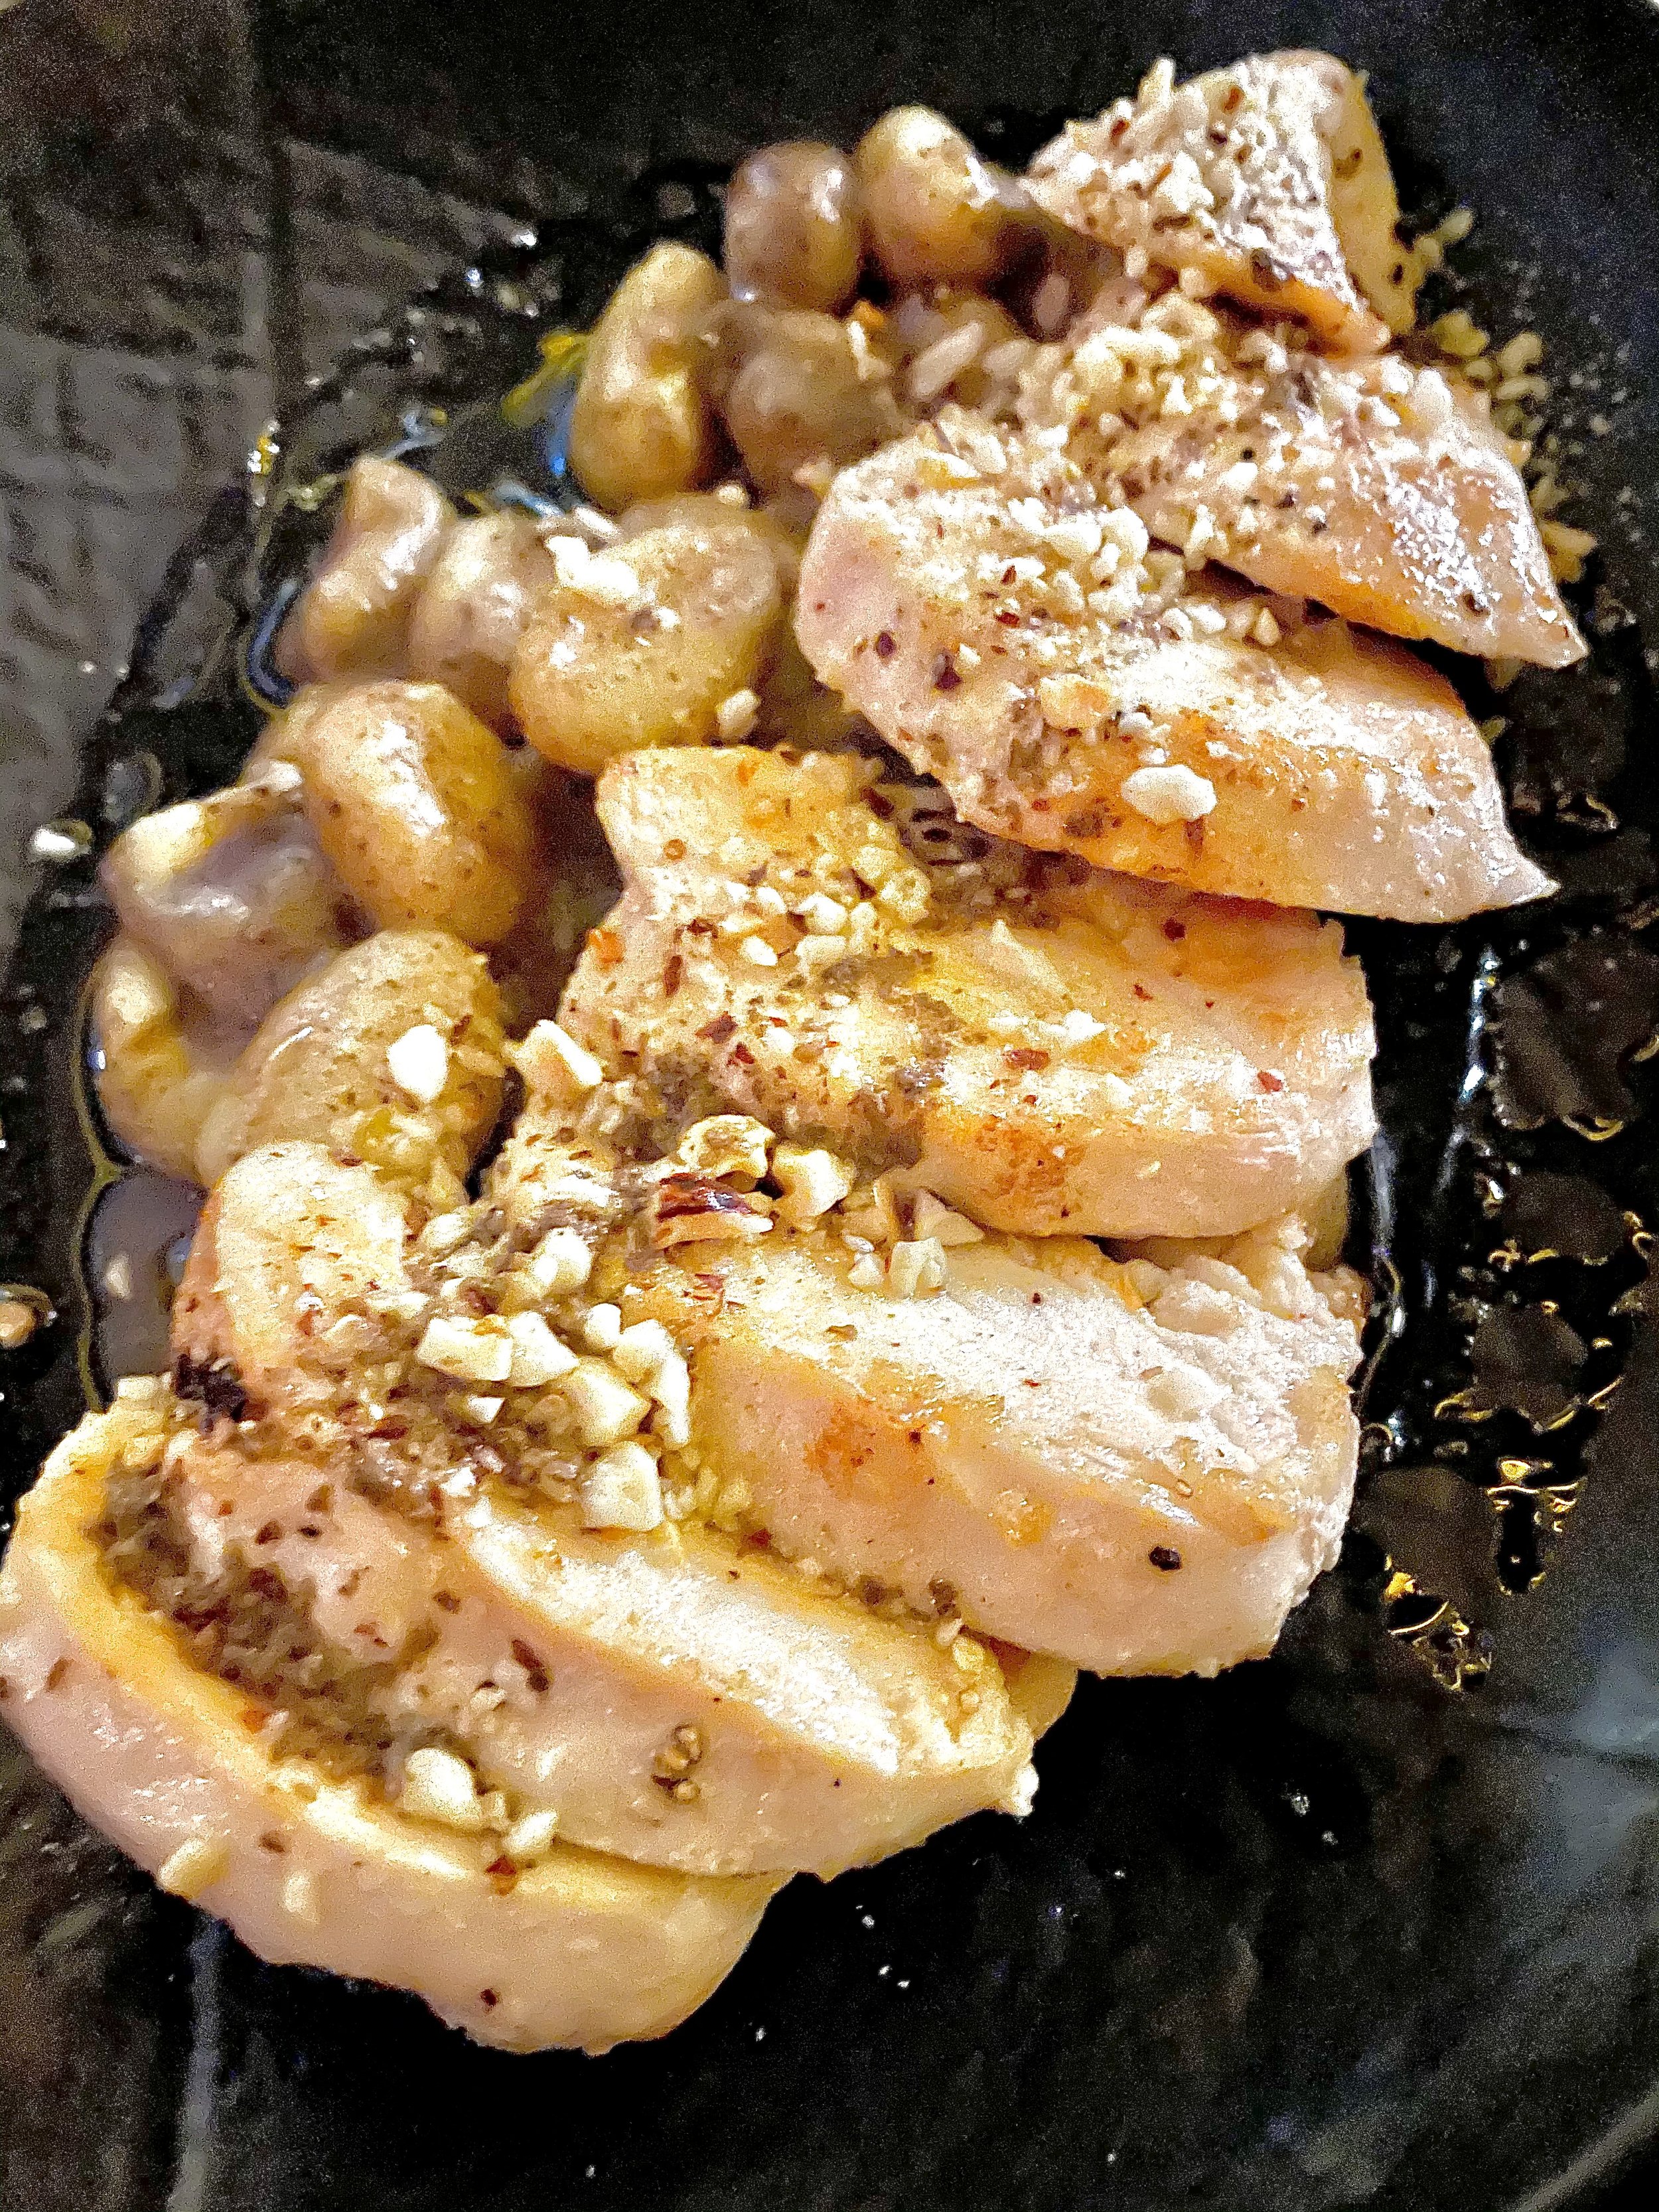 Chicken Breast with Gnocchi and Truffle Sauce